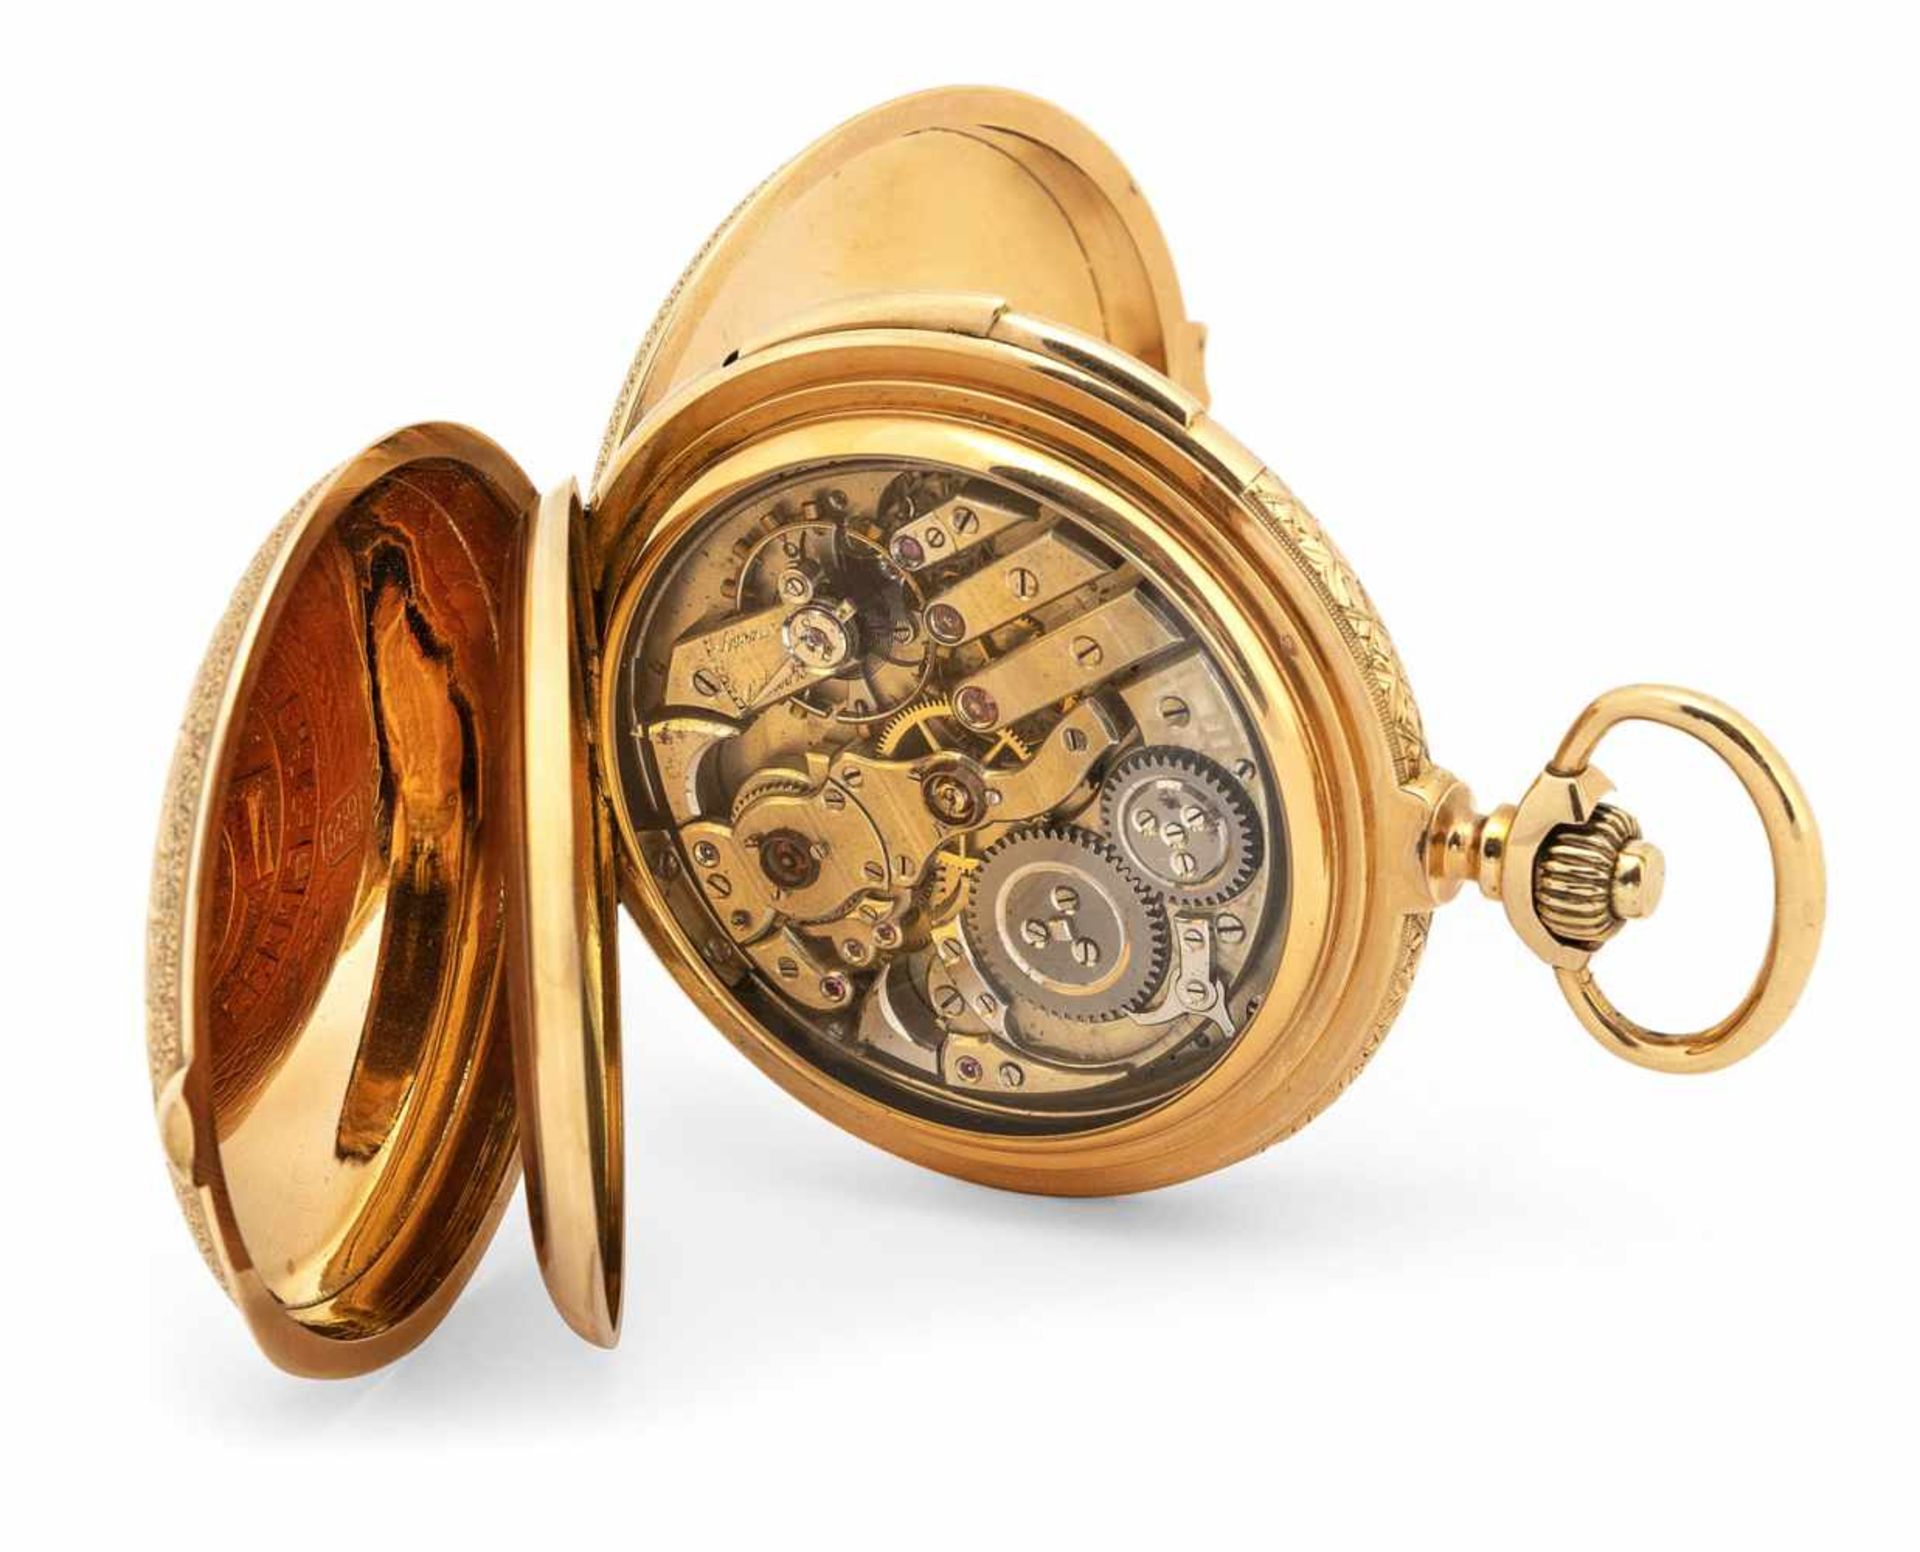 A fine 18ct. gold savonette hunter watch, signed C.J & A. PERRENOUD & CIE. LE LOCLE, N°1195, - Image 2 of 7